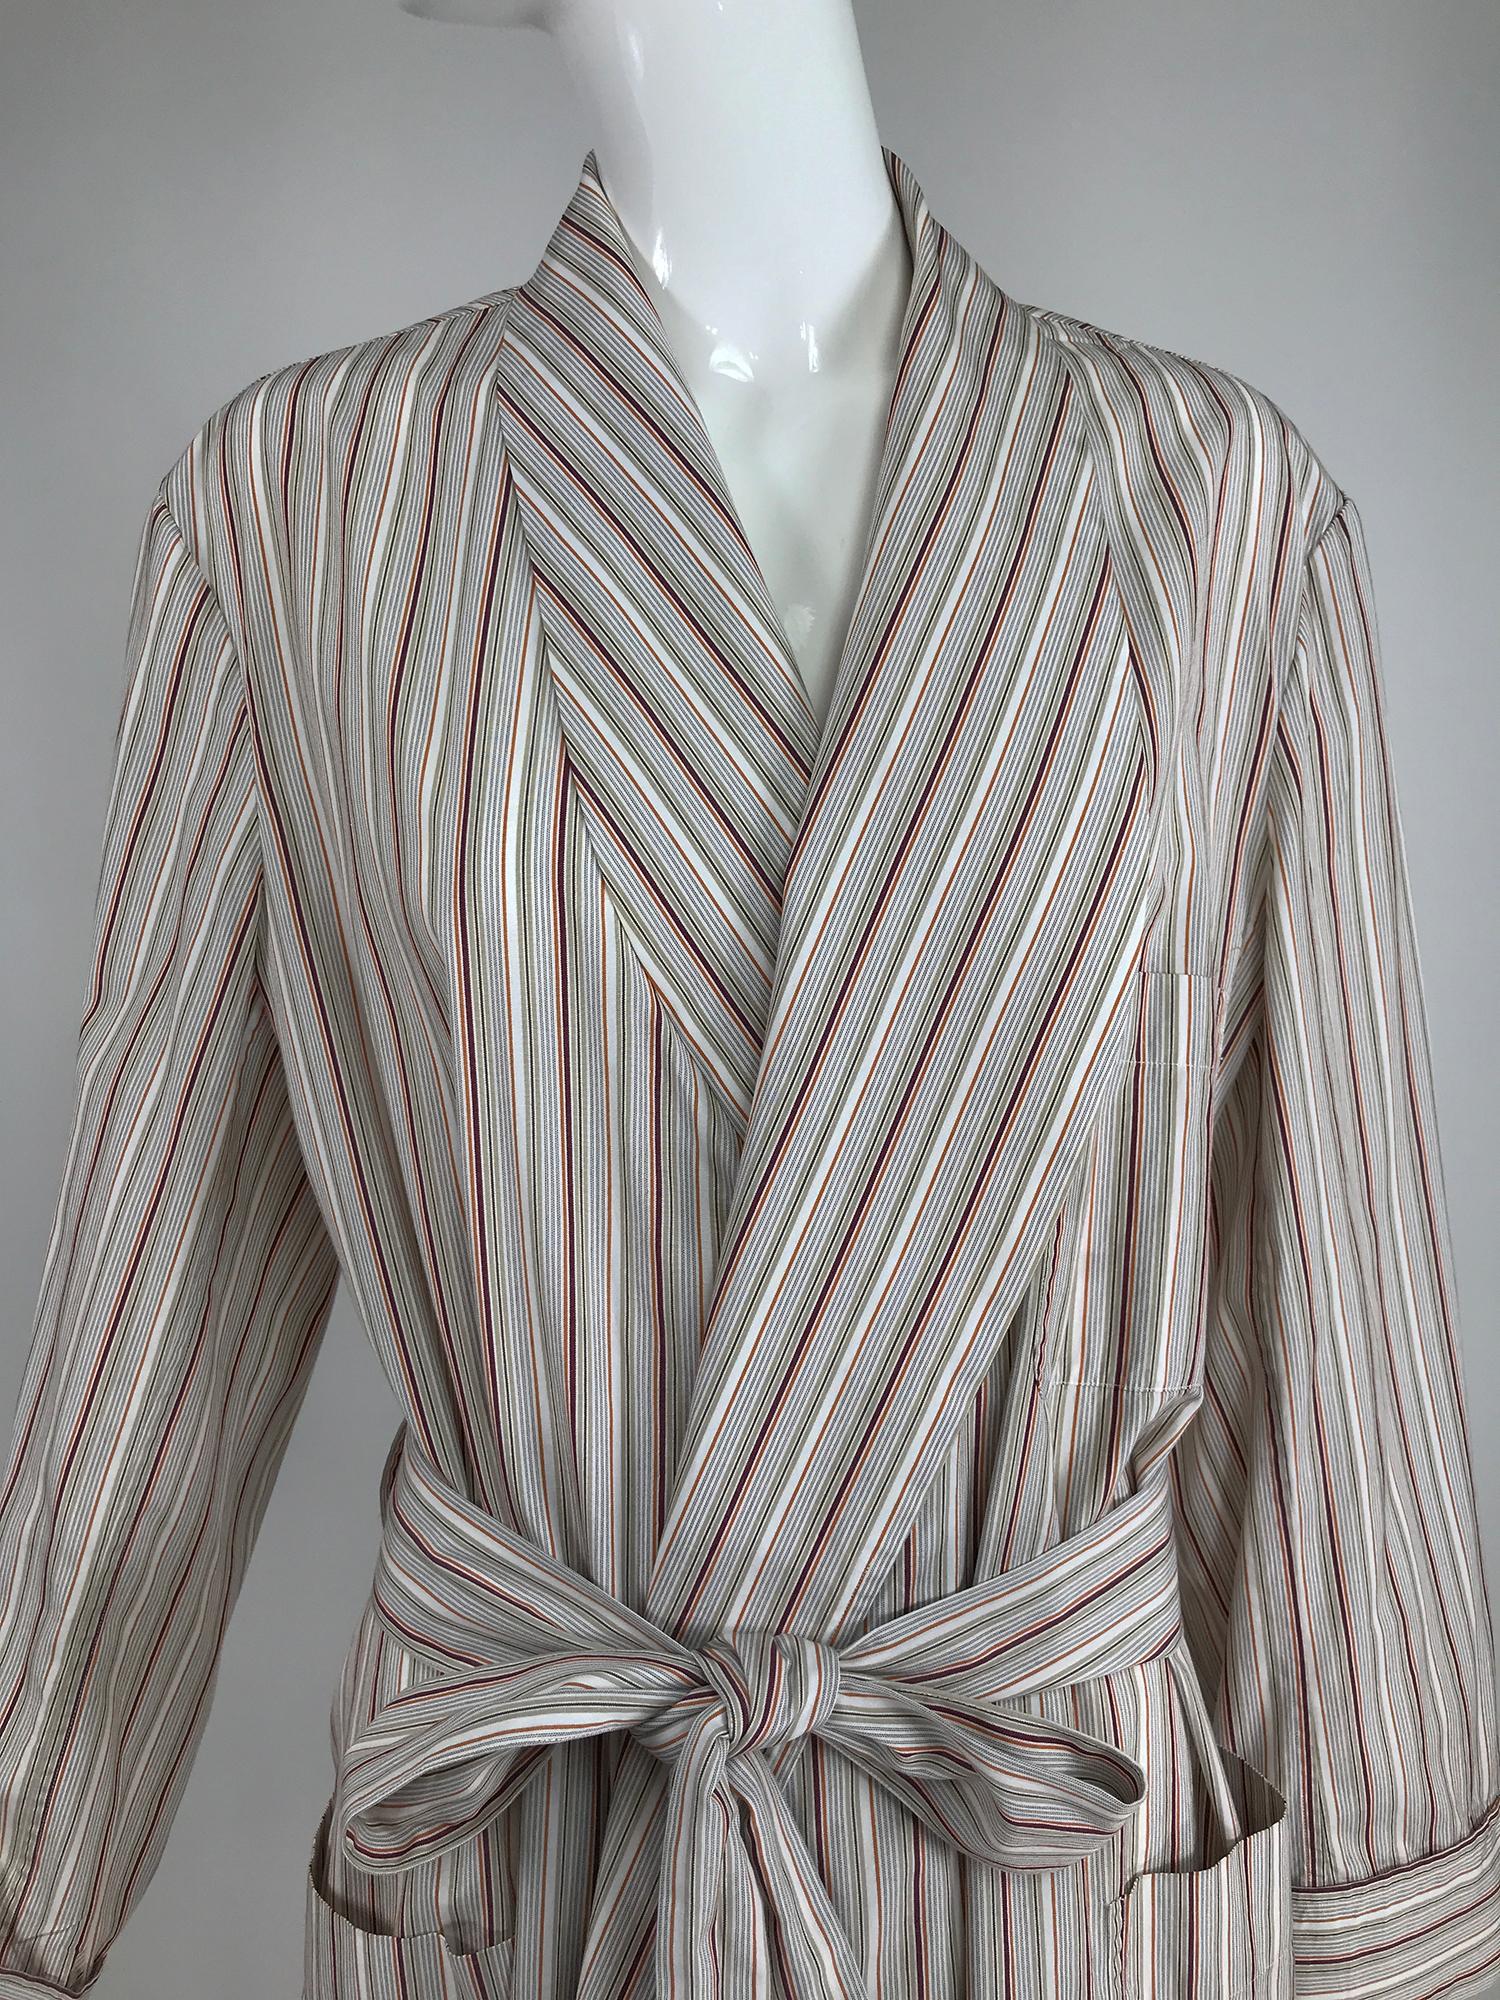 Charvet Paris, striped cotton robe in brick,coral, cream and taupe. This beautiful robe looks barely, if ever worn. Shawl collar, self belted wrap with chest and hip patch pockets. Unlined. Charvet, makers of some of the most exclusive men's wear in